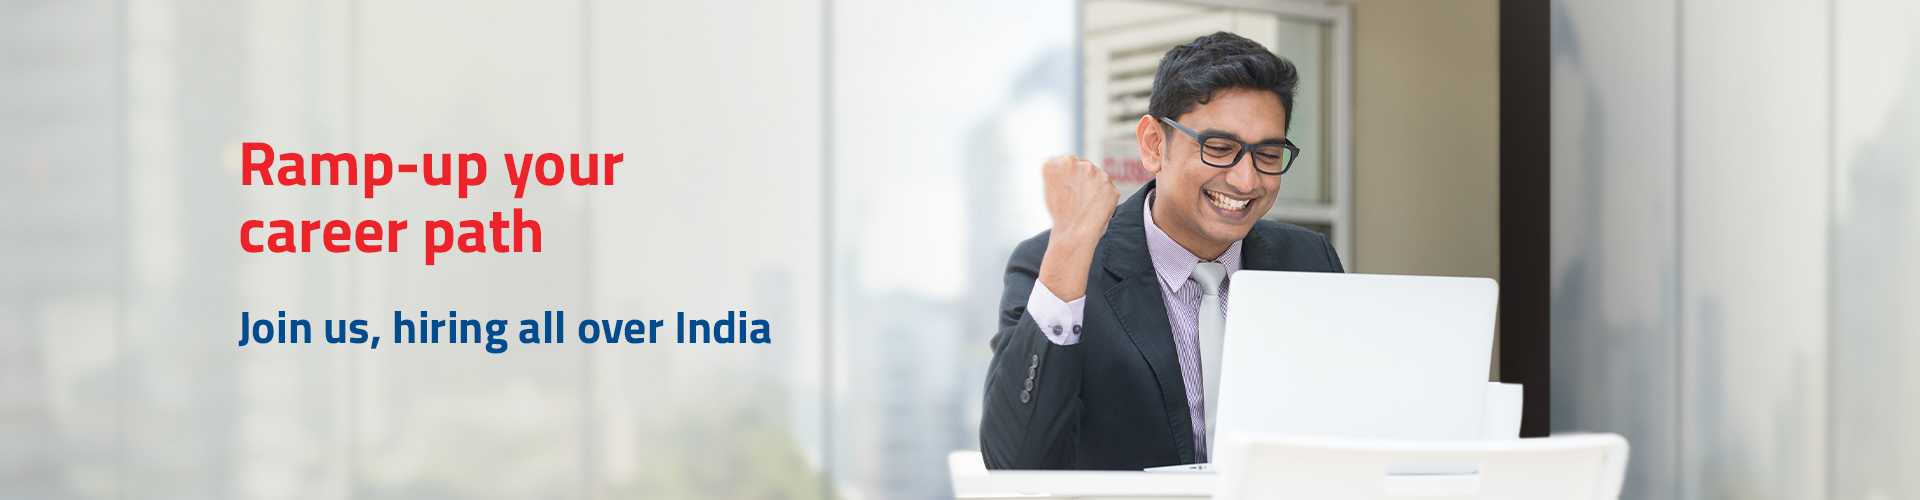 careers-at-hdfc-banner